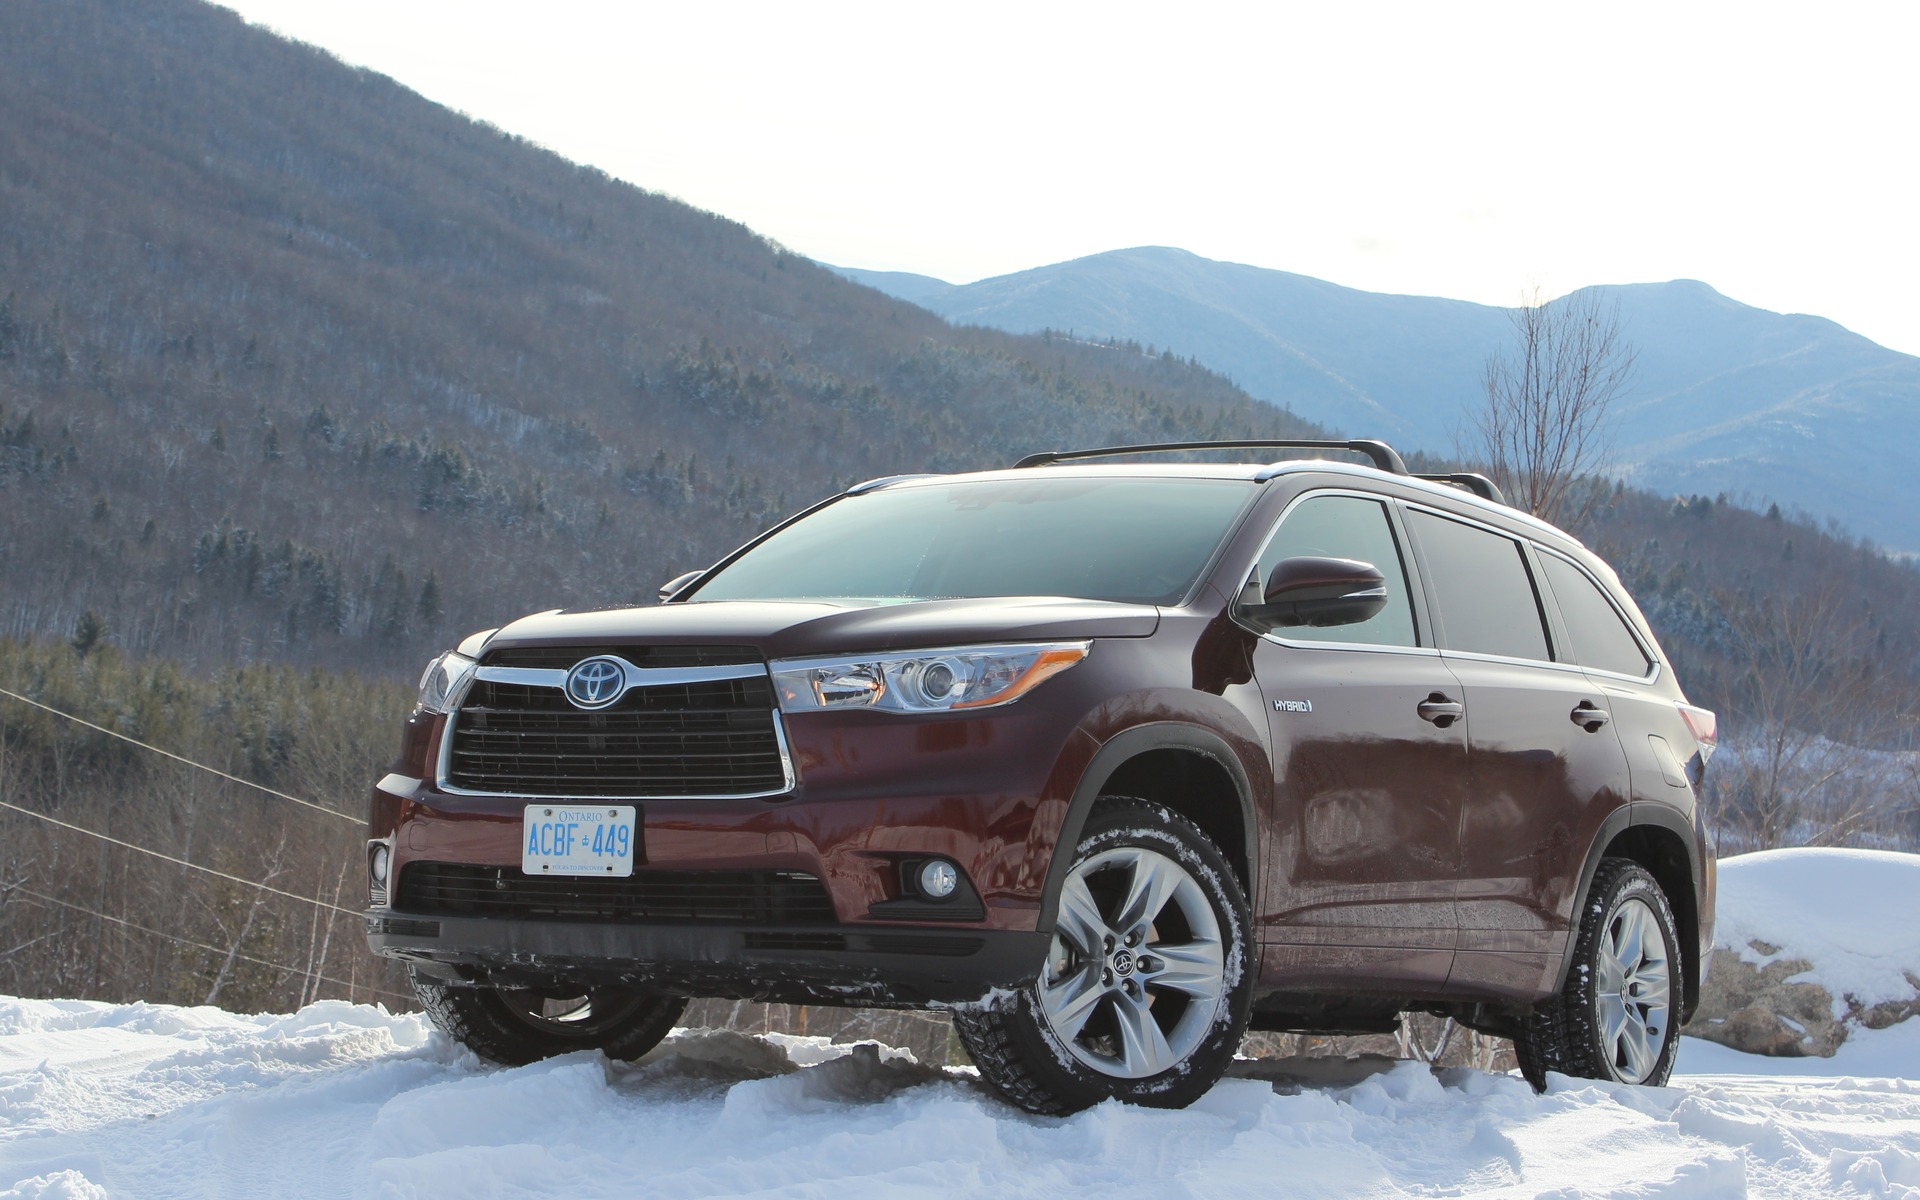 2016 Toyota Highlander Hybrid: the Eco-Friendly Vehicle for Blended Families - The Car Guide